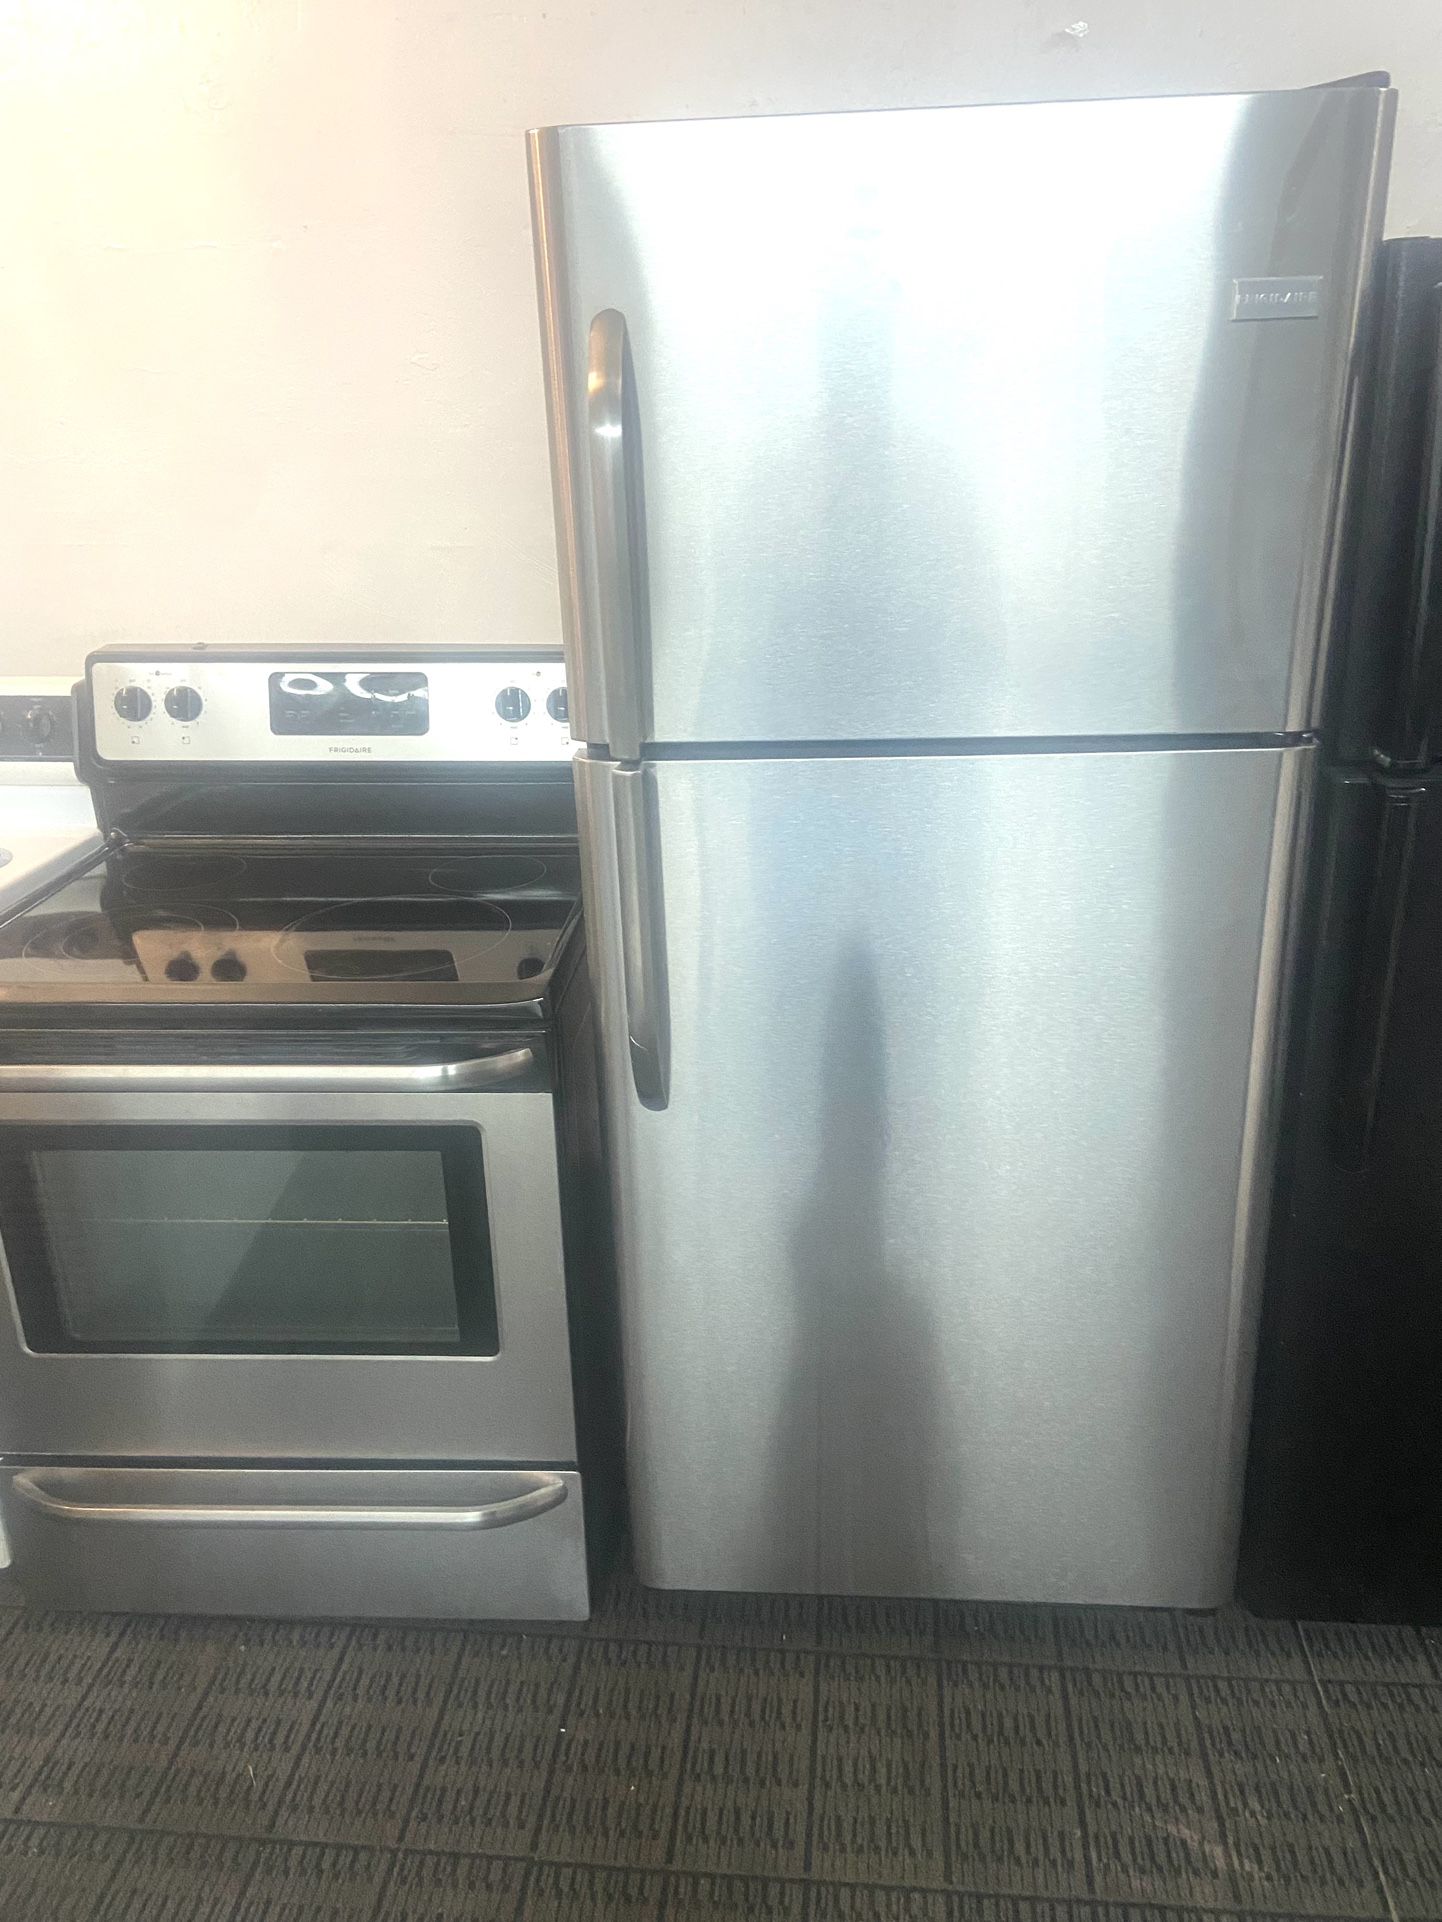 Quality & Affordable Stainless Steel Frigidaire Refrigerator $275